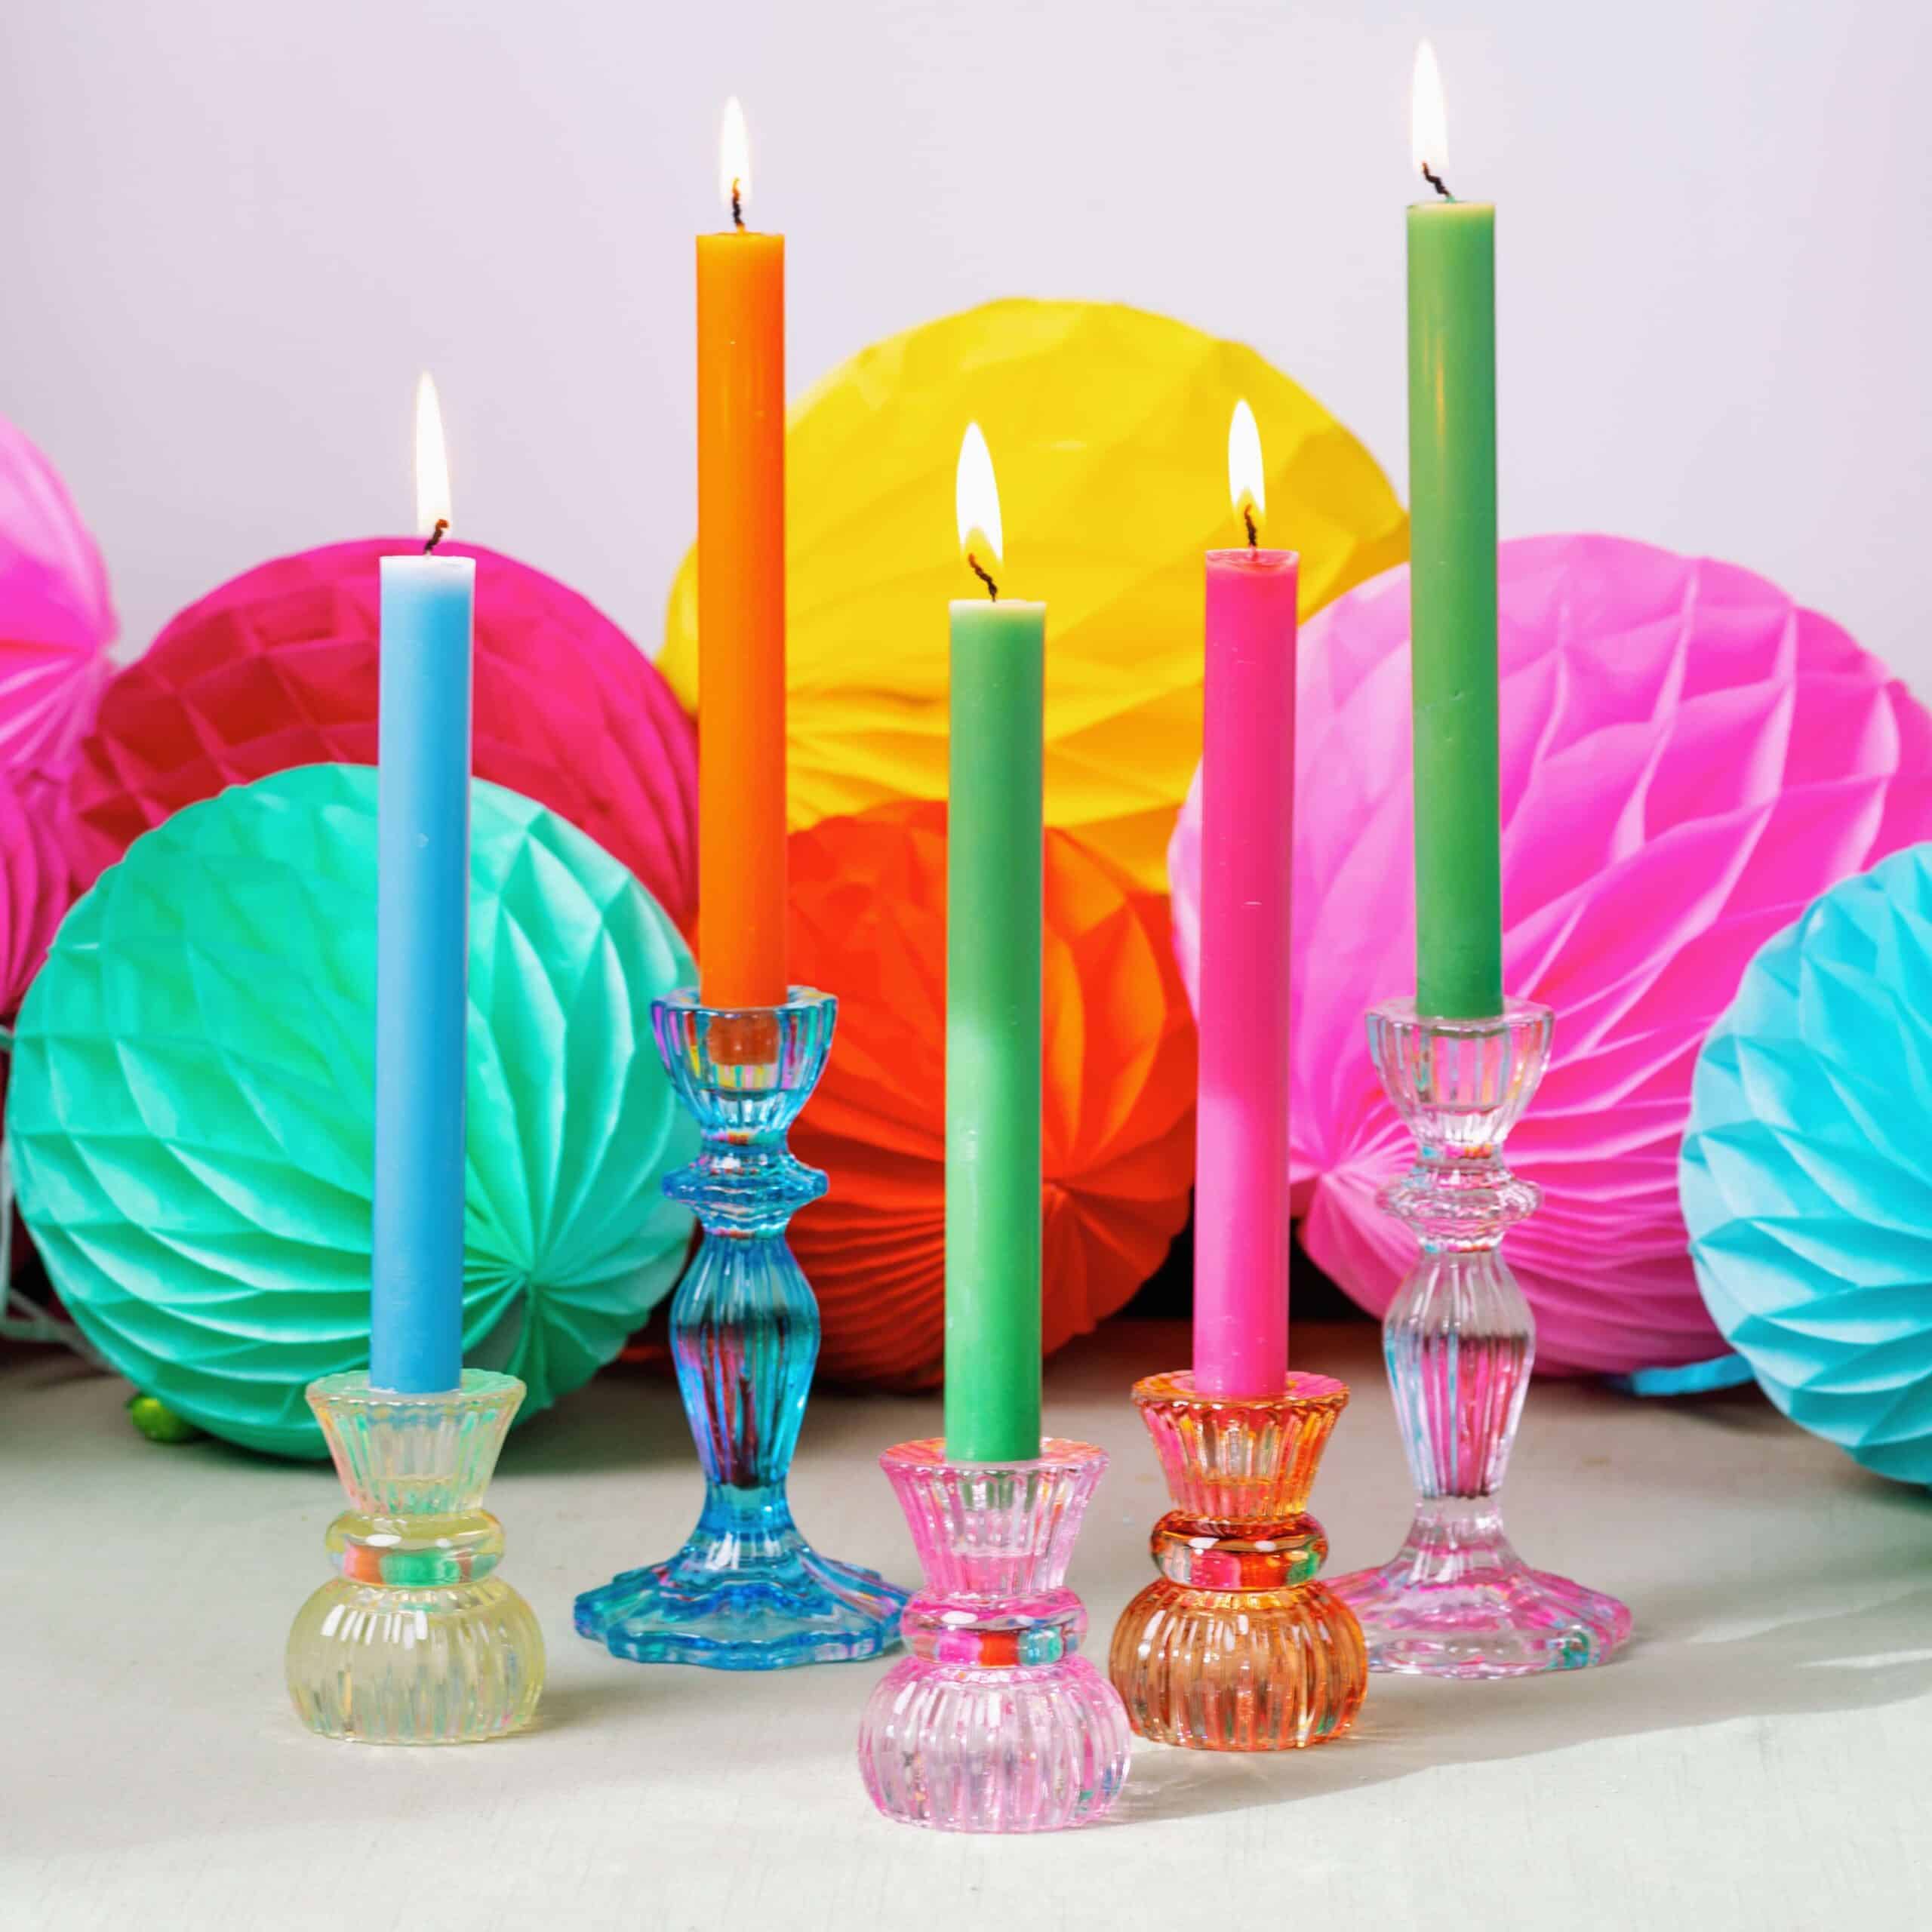 Colourful glass candlesticks with paper lanterns behind